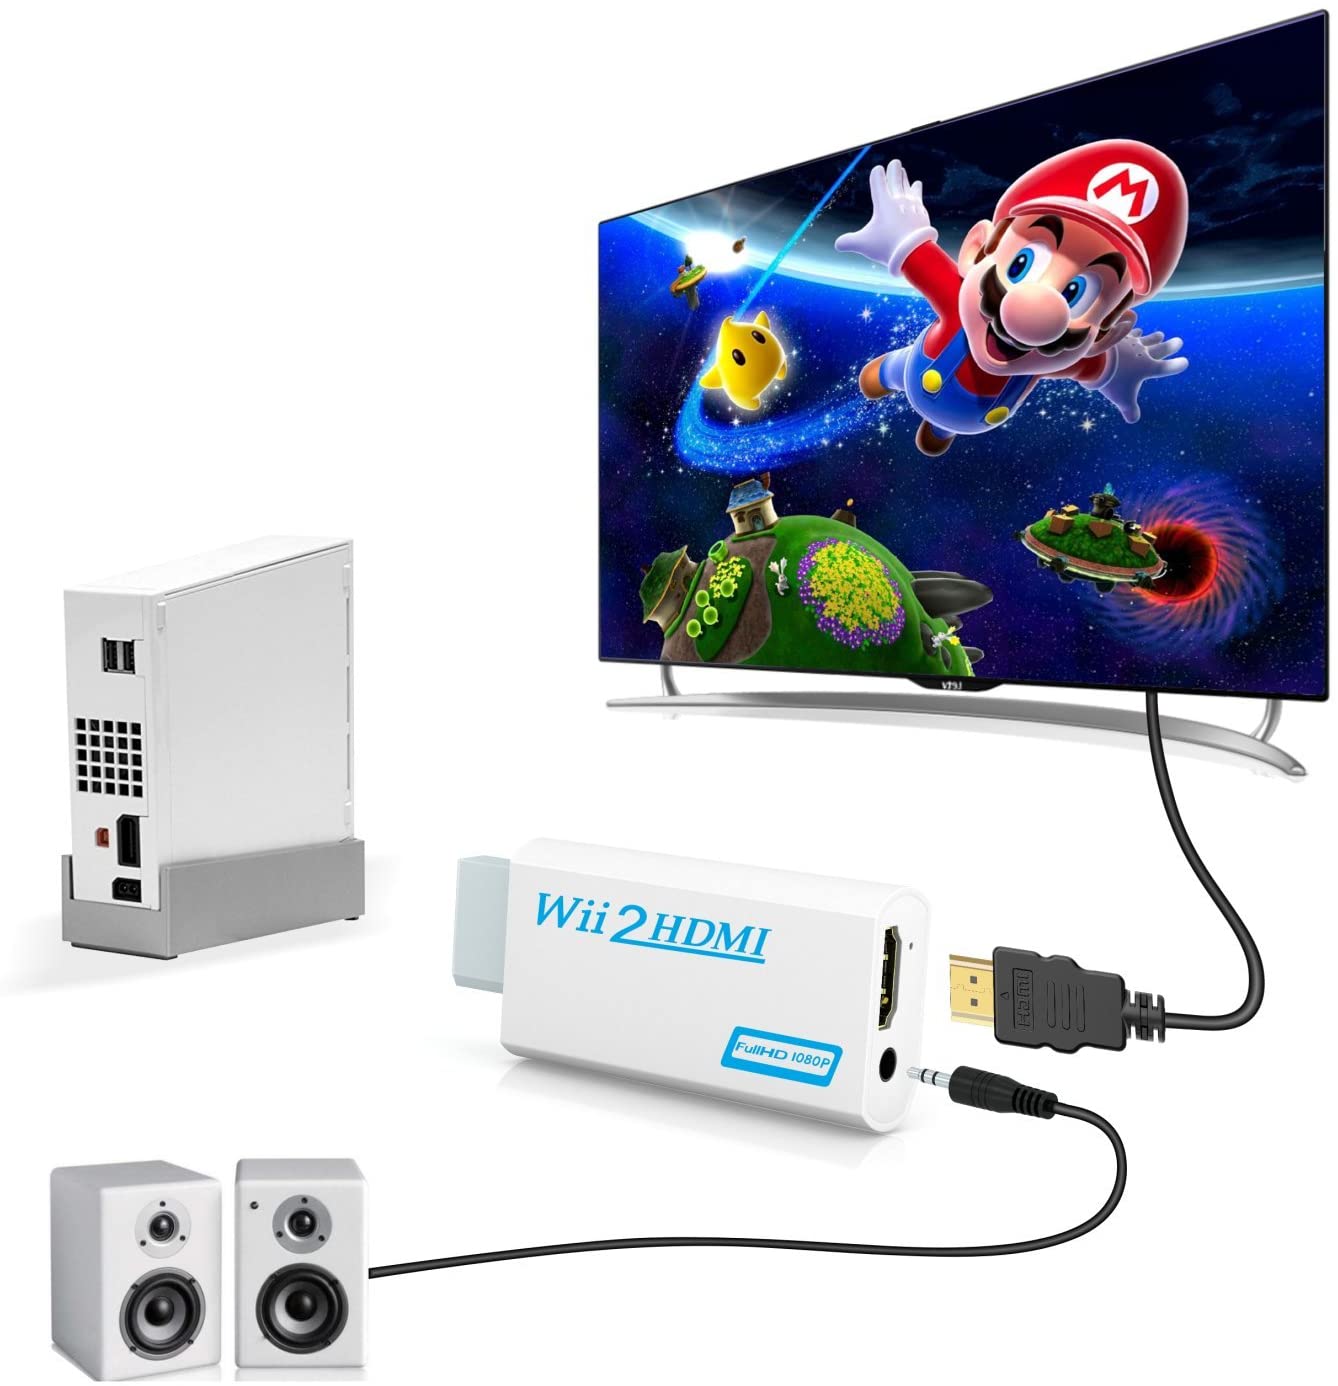 How to Connect Wii to Smart TV